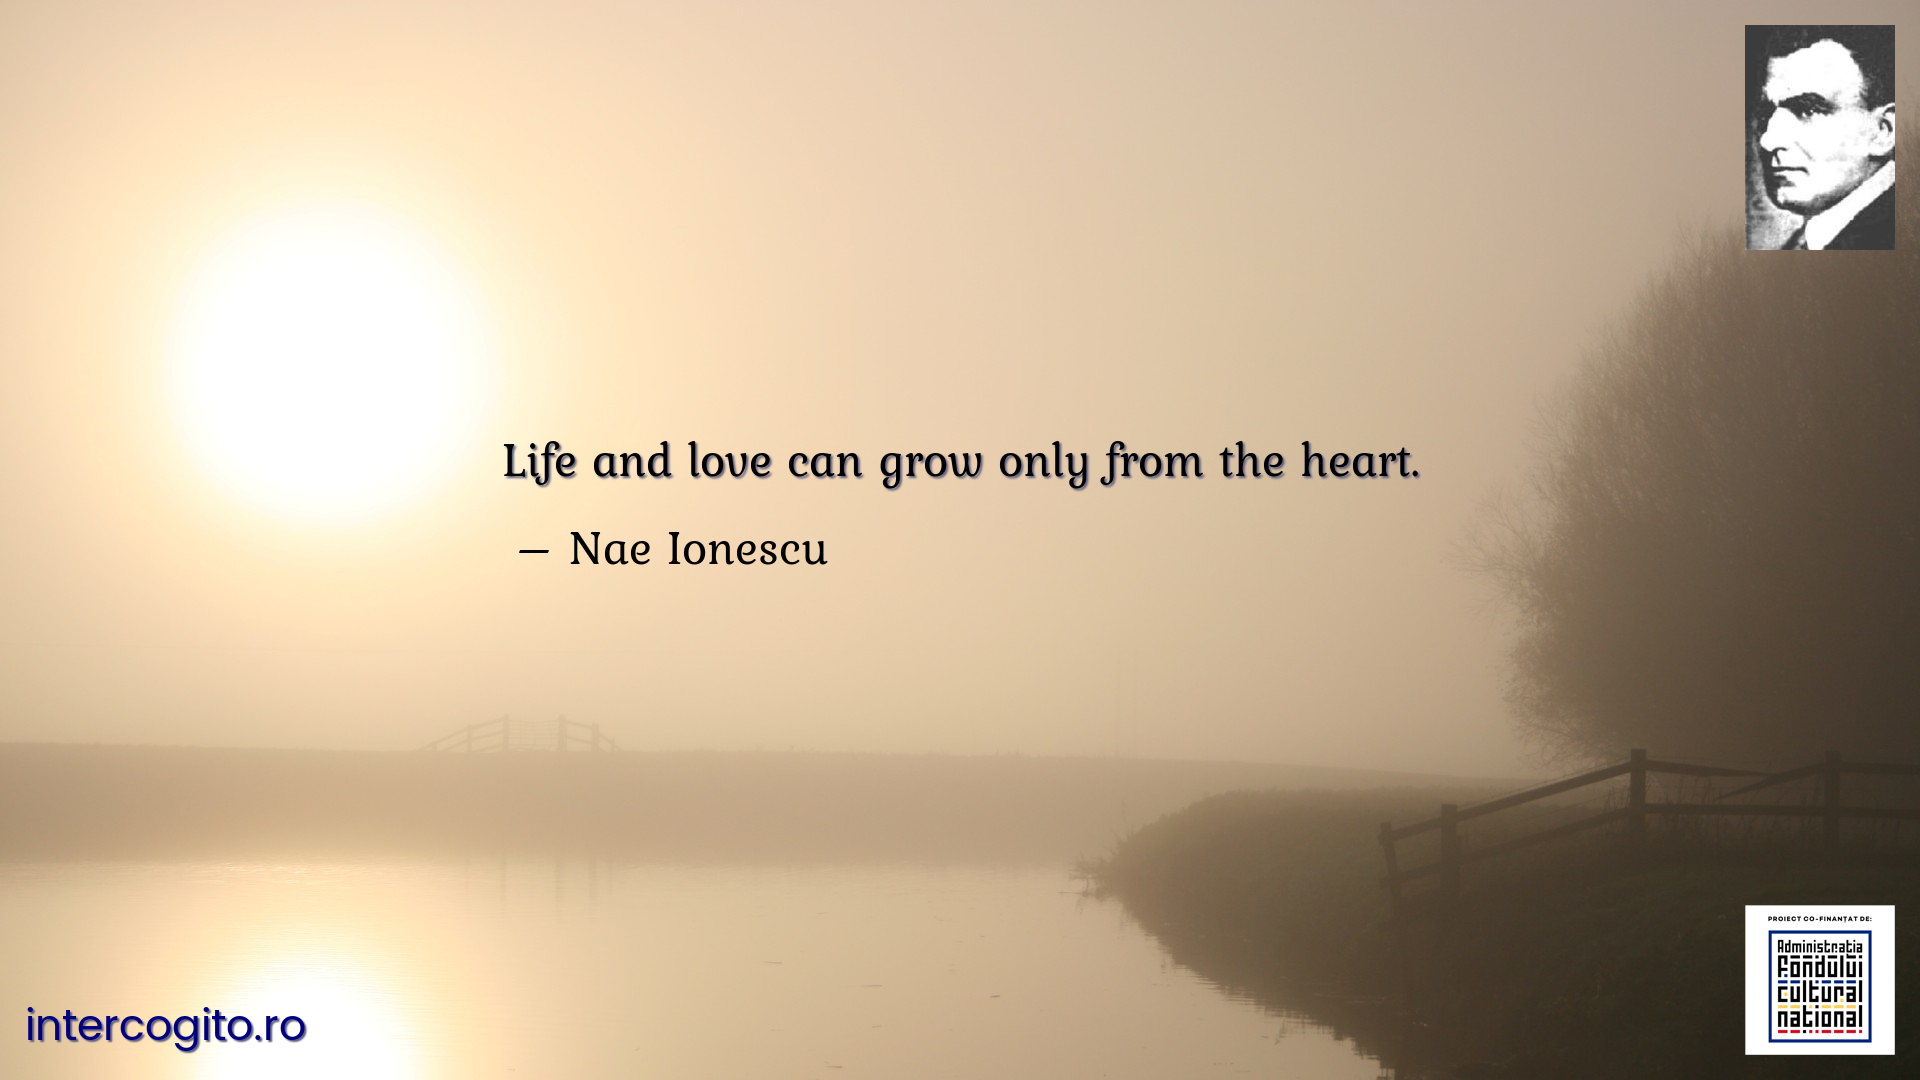 Life and love can grow only from the heart.